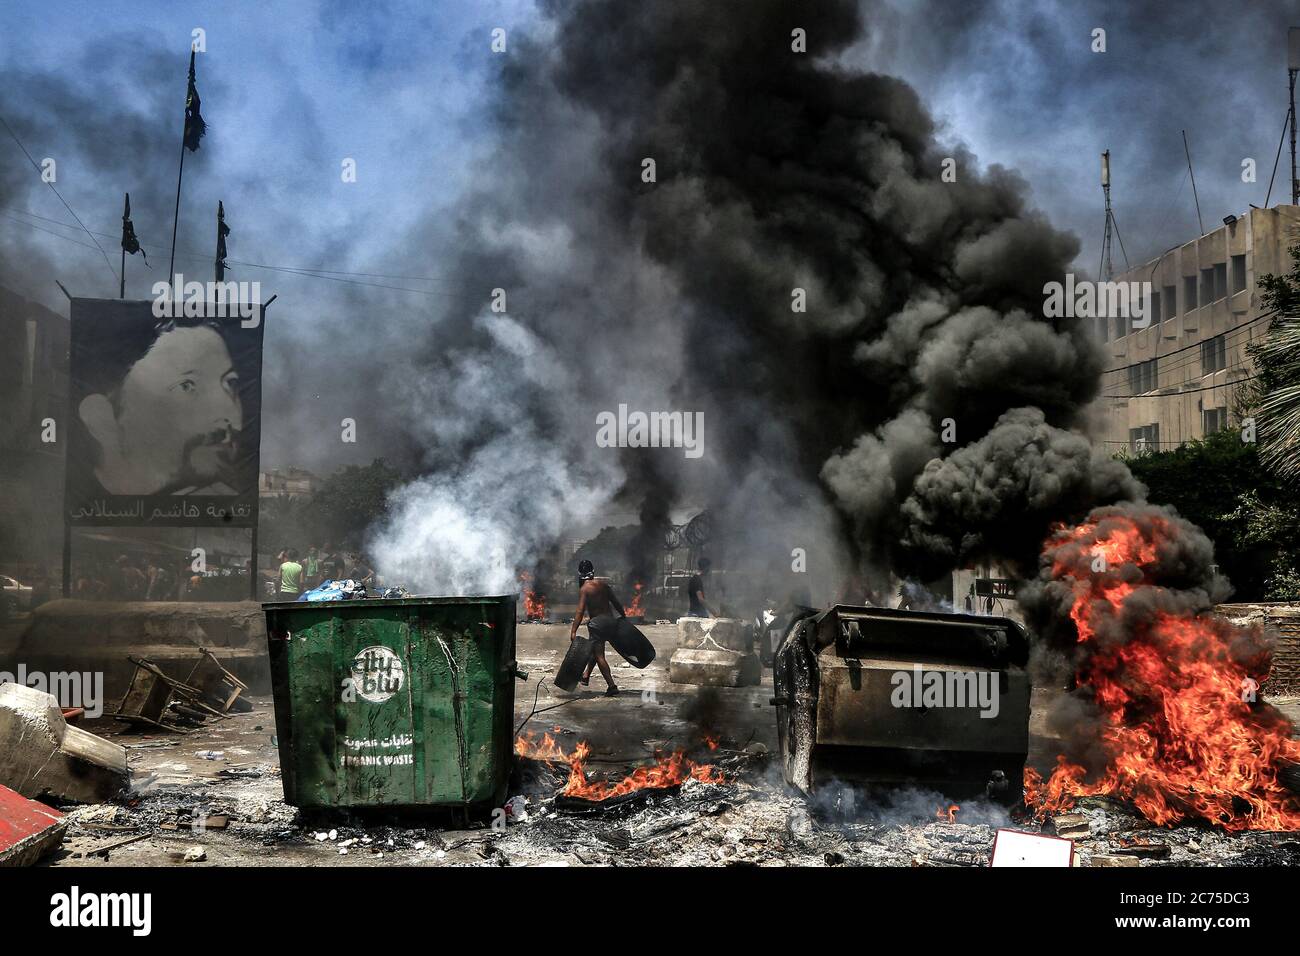 Beirut, Lebanon. 14th July, 2020. A demonstrator carries tyres on his way to burn them to block the main road in Ouzai, south of Beirut during an anti-government protest. Credit: Marwan Naamani/dpa/Alamy Live News Stock Photo